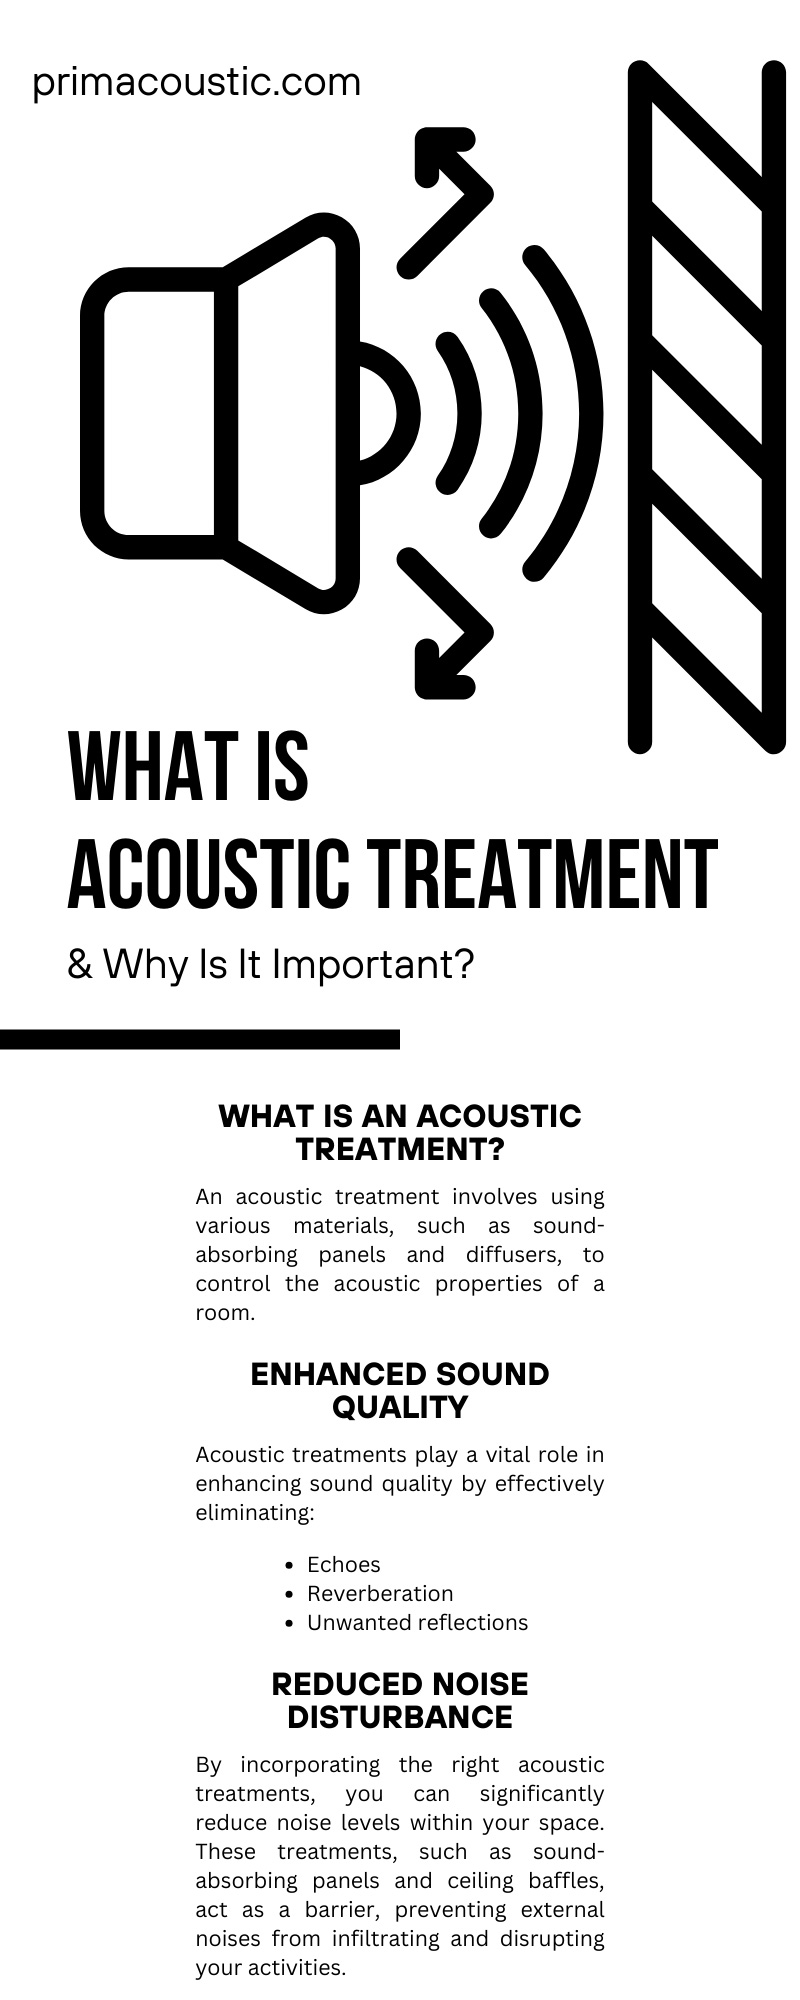 What Is Acoustic Treatment & Why Is It Important?